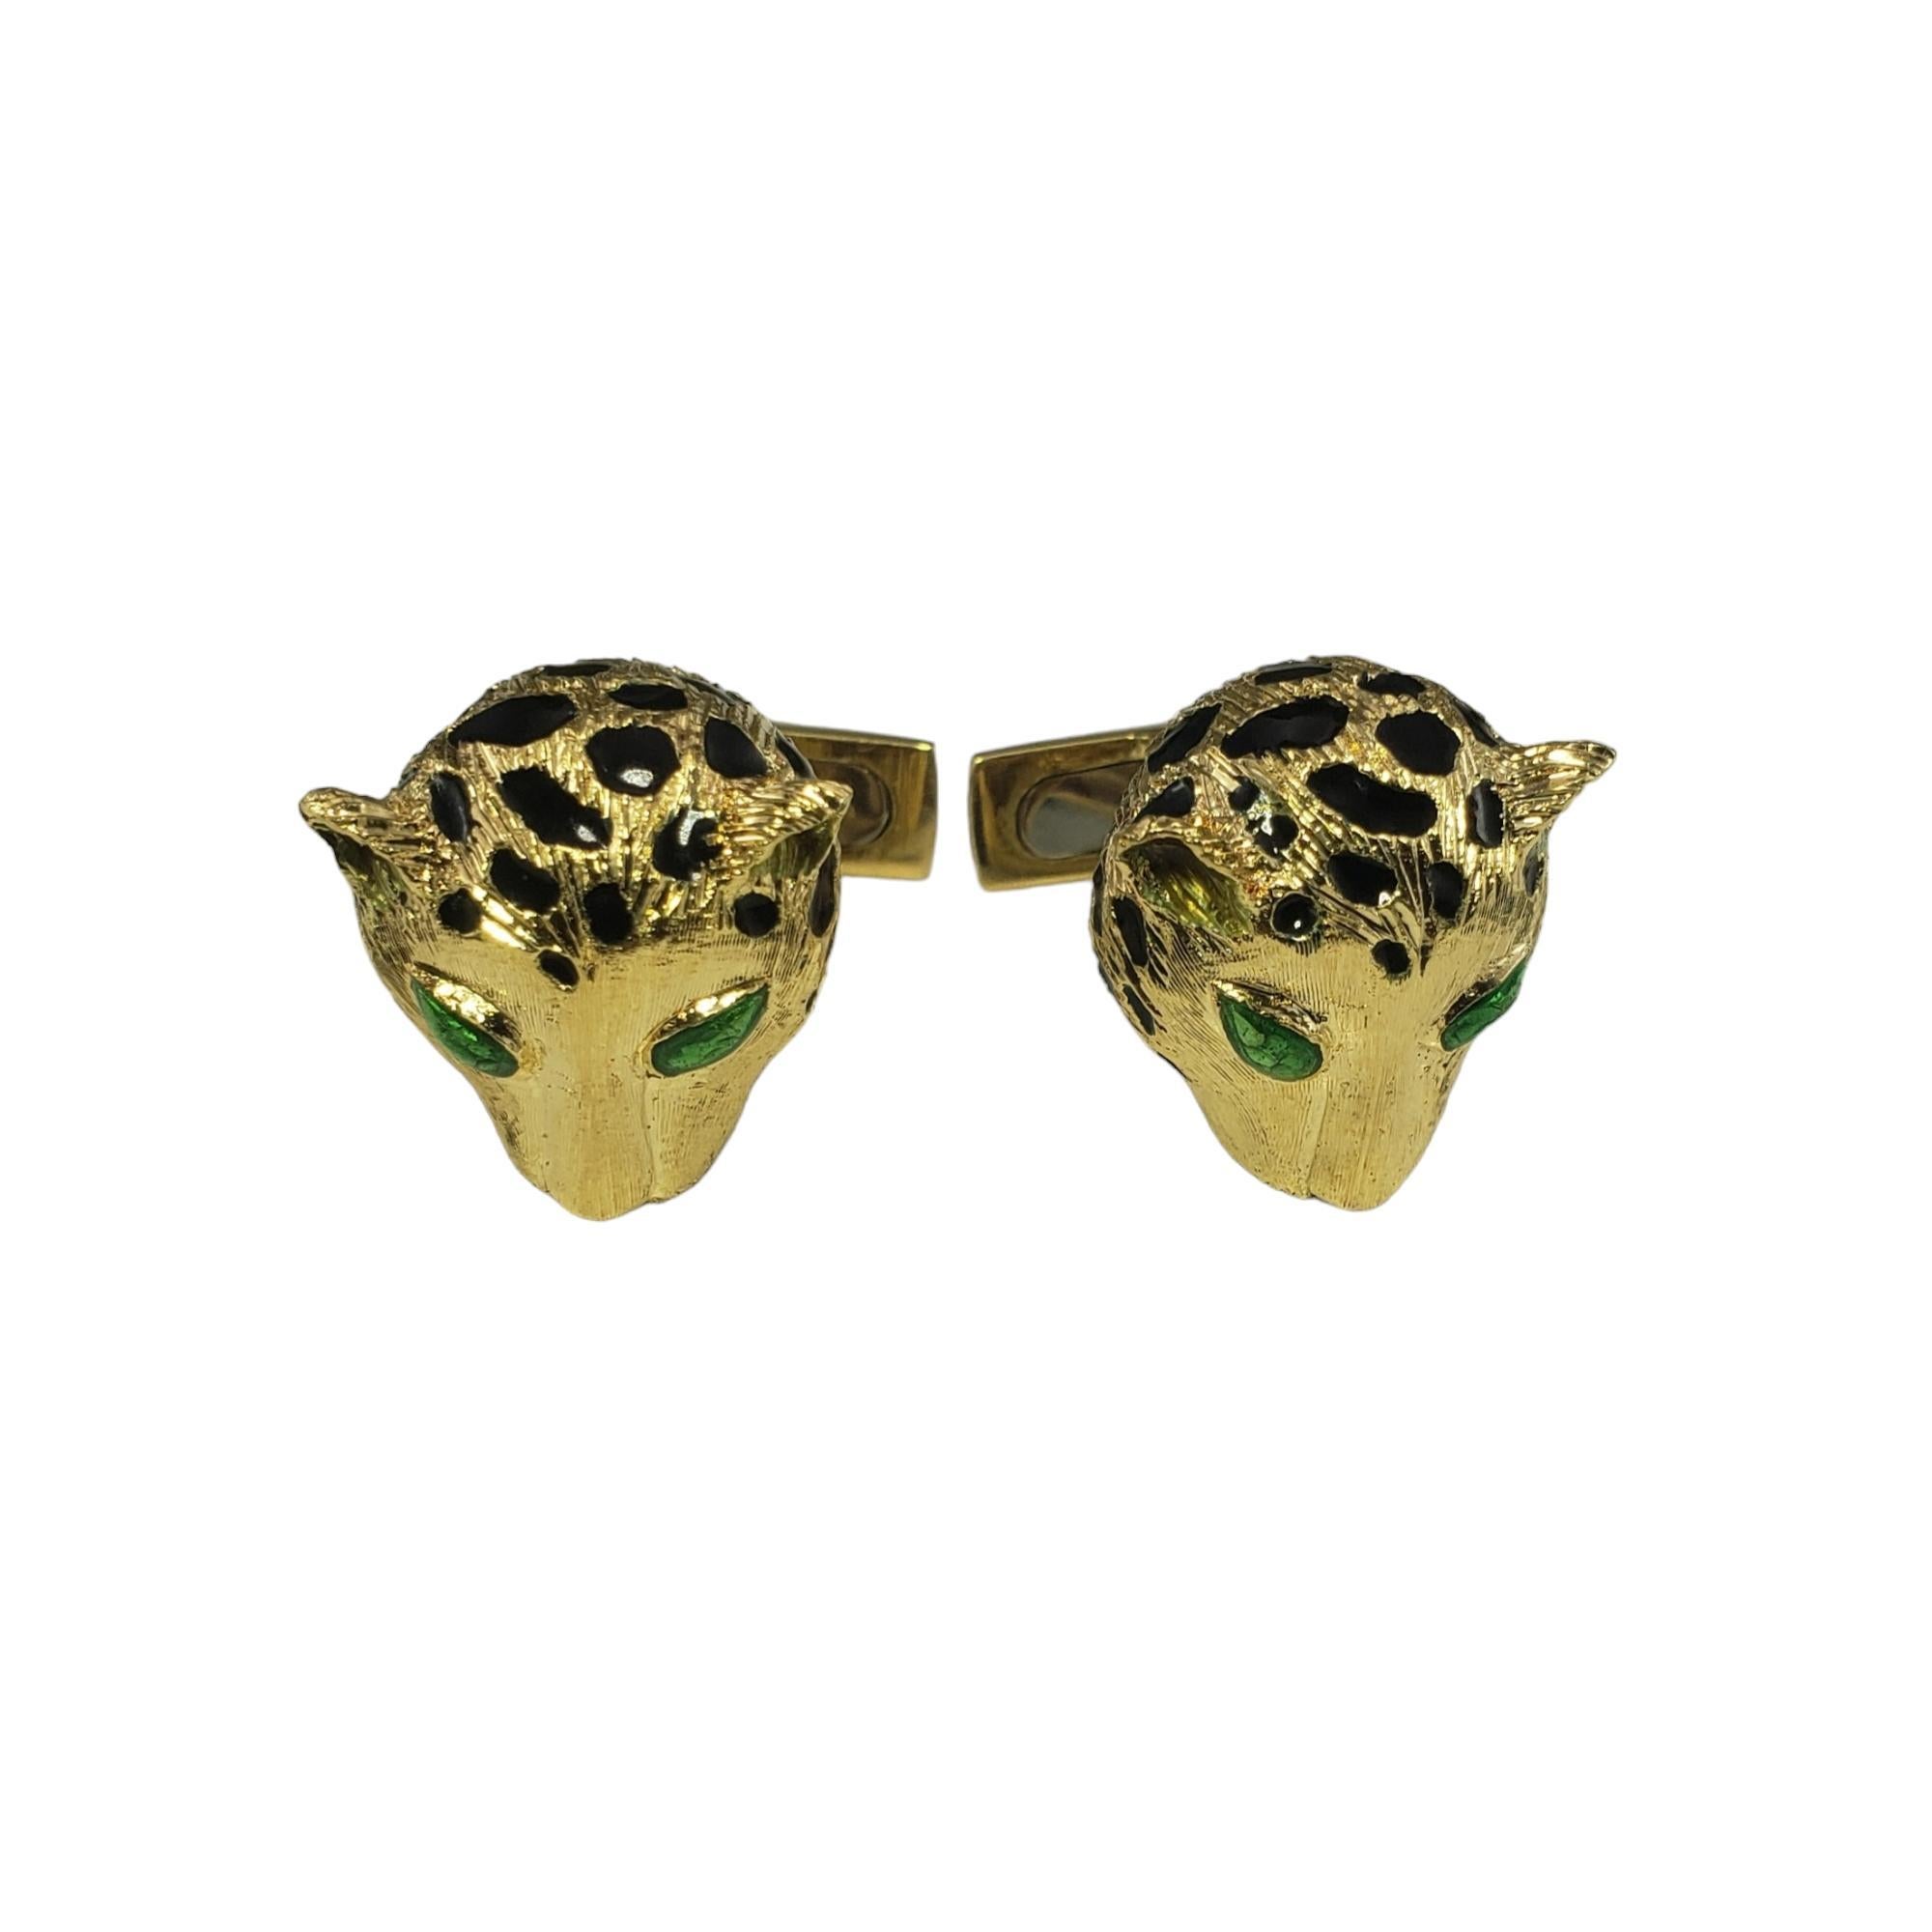 Vintage 18K Yellow Gold Leopard Cufflinks-

These elegant leopard cufflinks are crafted in meticulously detailed 18K yellow gold and colorful enamel.

Size: 18 mm x 17 mm

Stamped: K18 ITALY

Weight: 19.6 gr./ 12.6 dwt.

Very good condition,